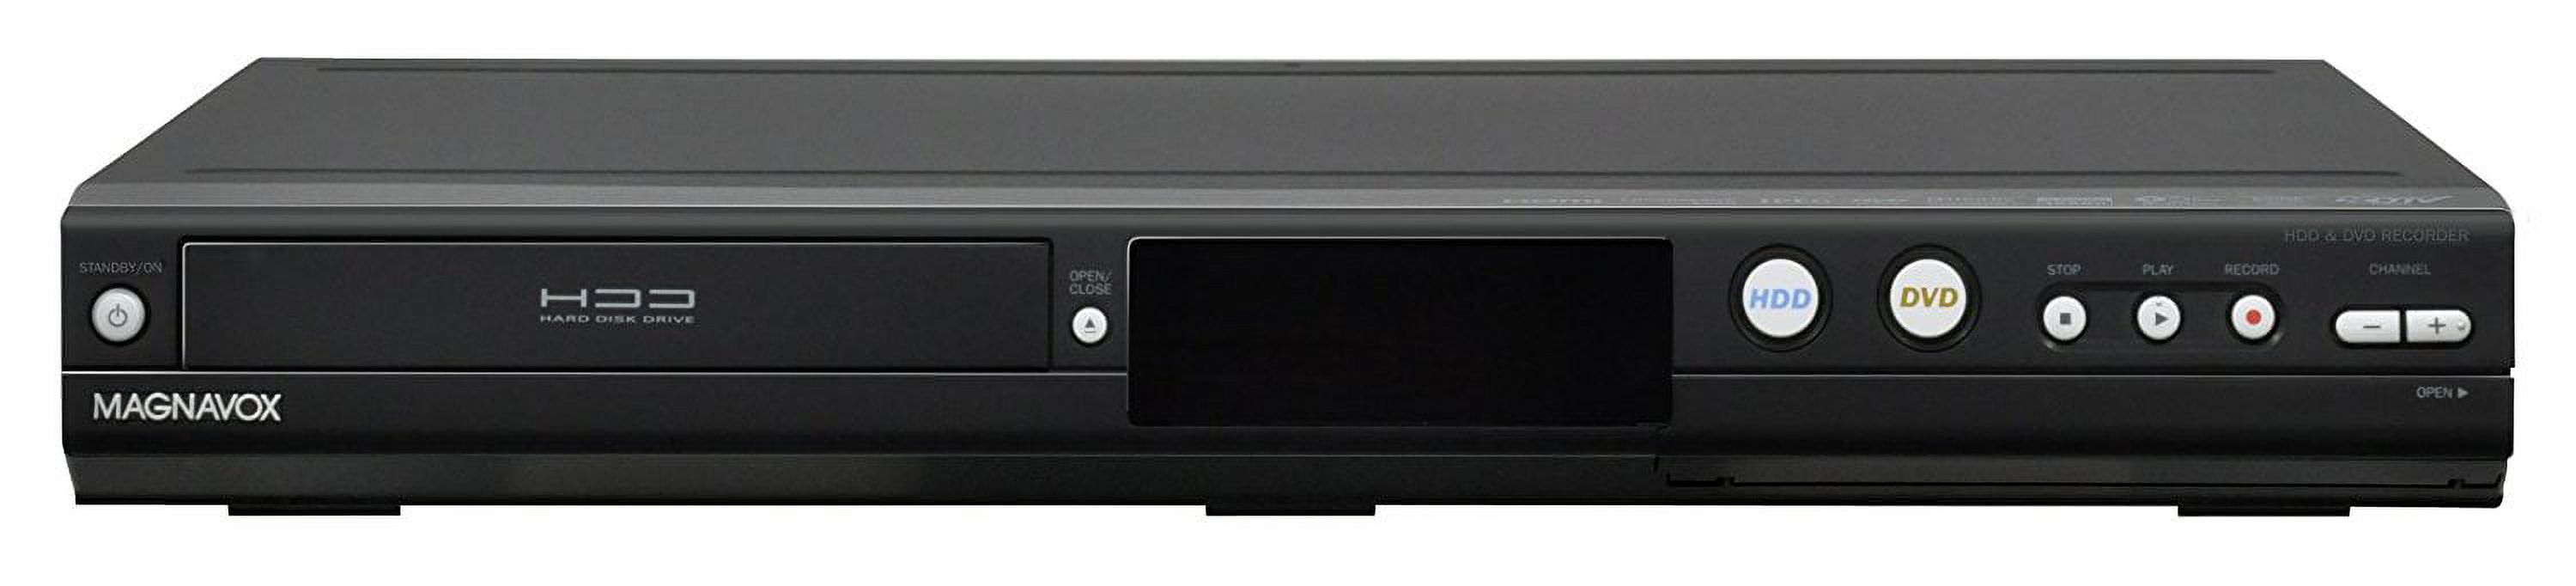 Pre-Owned Magnavox MDR533H 1 Disc(s) DVD Player/Recorder 1080p 320 GB HDD Black - w/ Original Remote, Manual, and A/V Cables (Good) - image 1 of 5